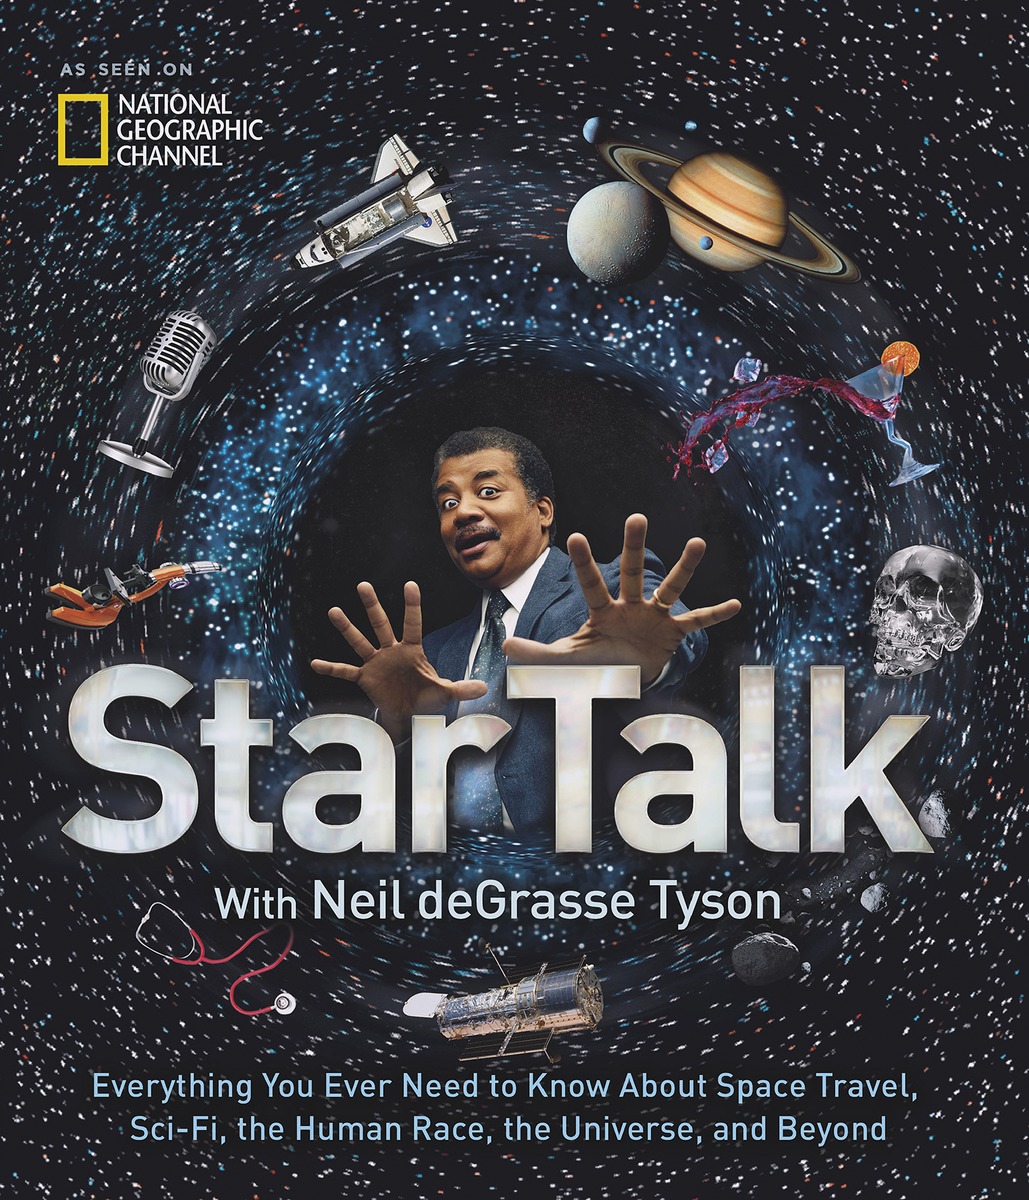 Cover art of the StarTalk book, featuring Neil deGrasse Tyson, written by Charles Liu and edited by Jeffrey Lee Simons, published by National Geographic.